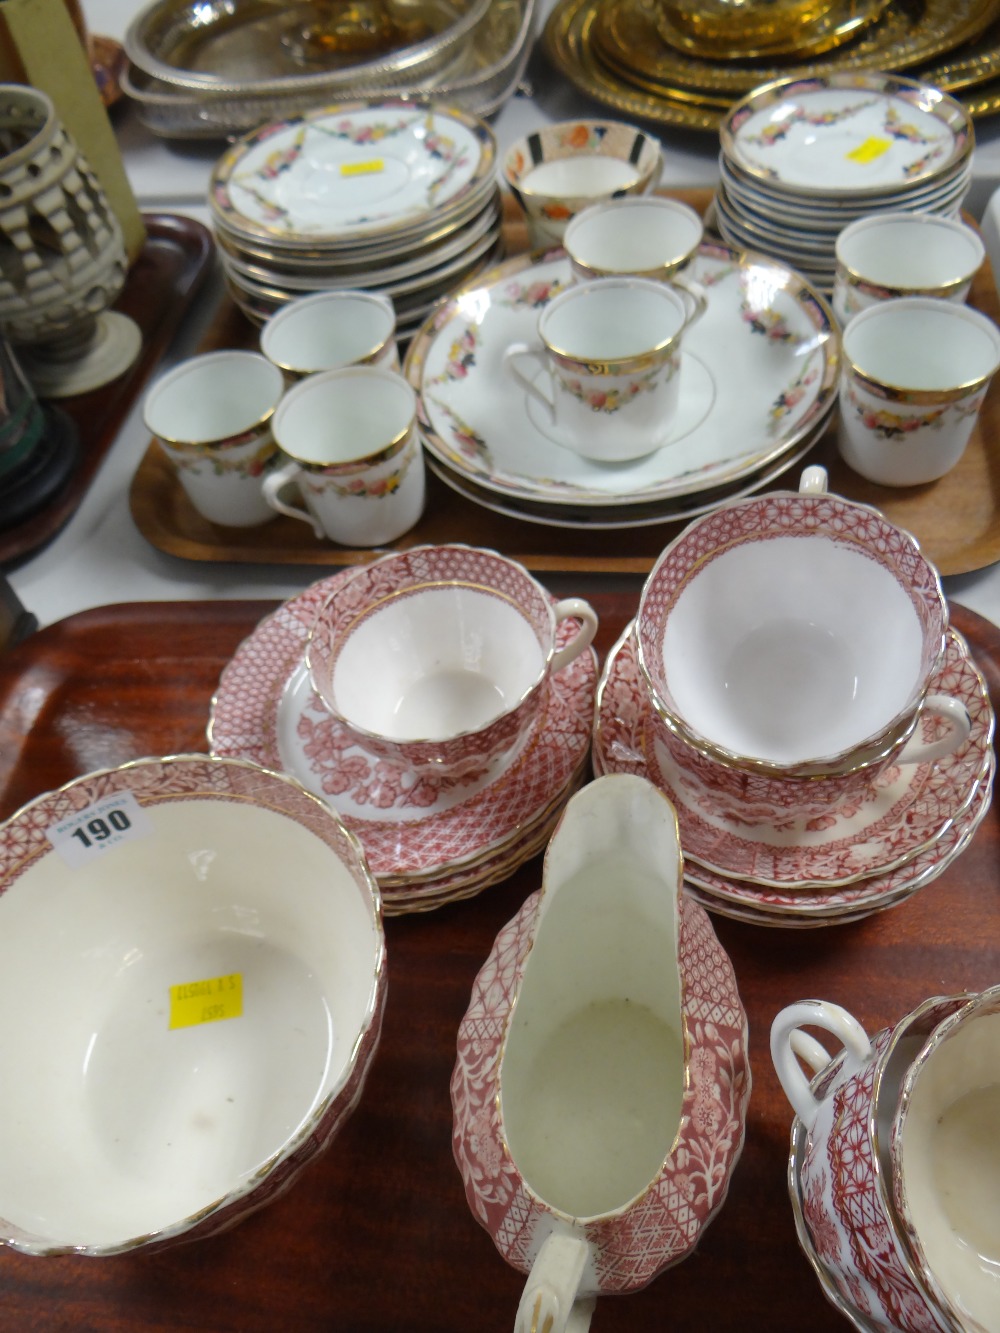 Quantity of mixed tea ware in two patterns